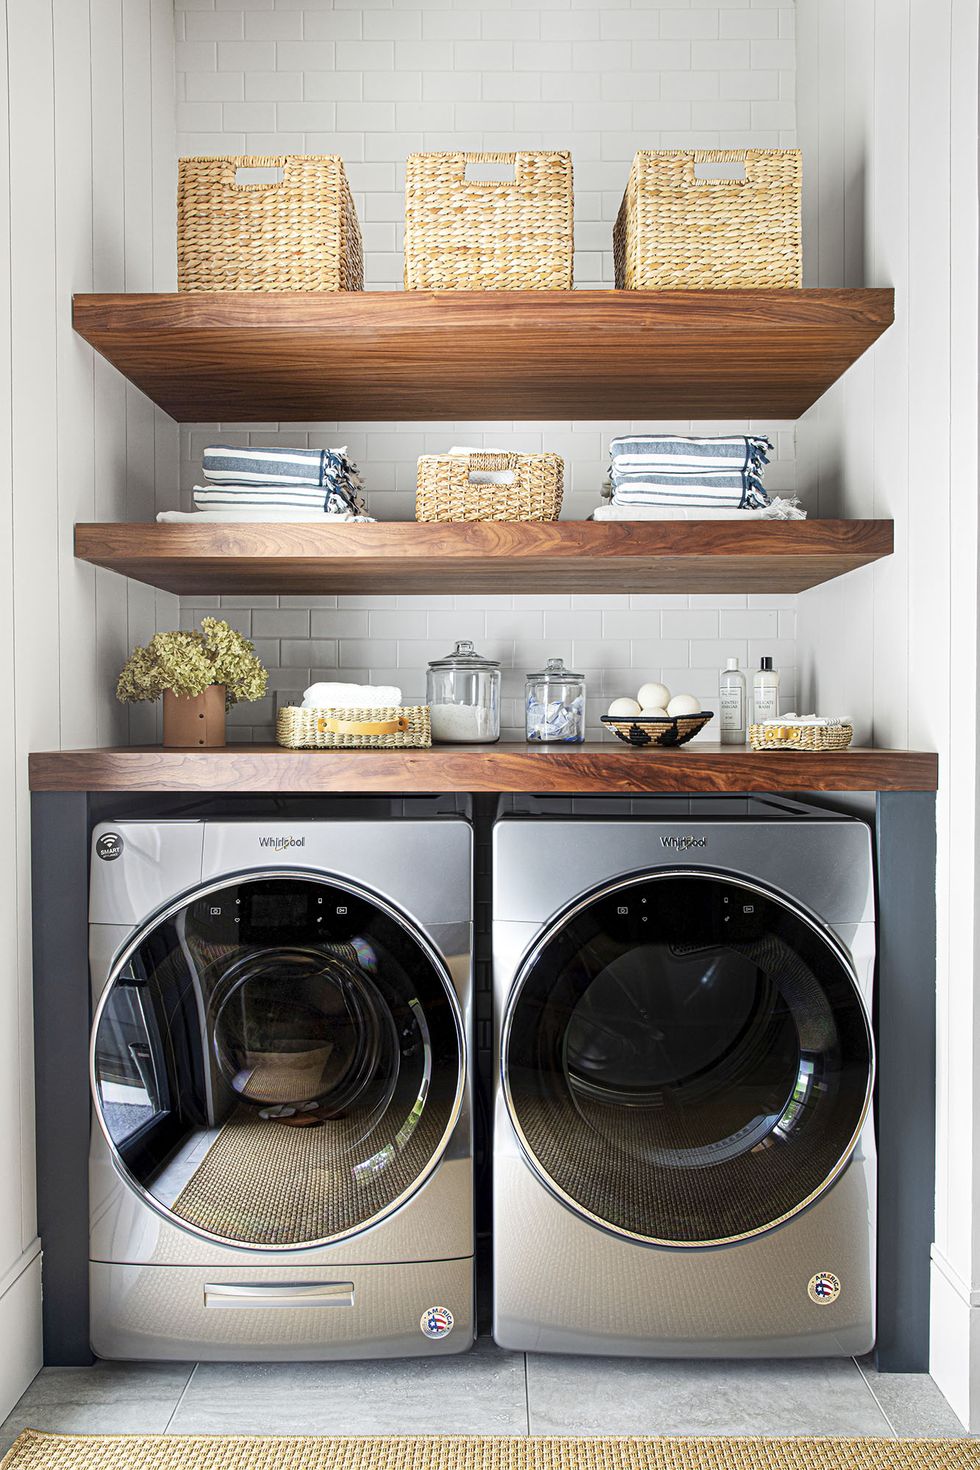 Laundry Room Ideas Built In Countertops 1645717409 ?crop=1xw 0.99975xh;center,top&resize=980 *